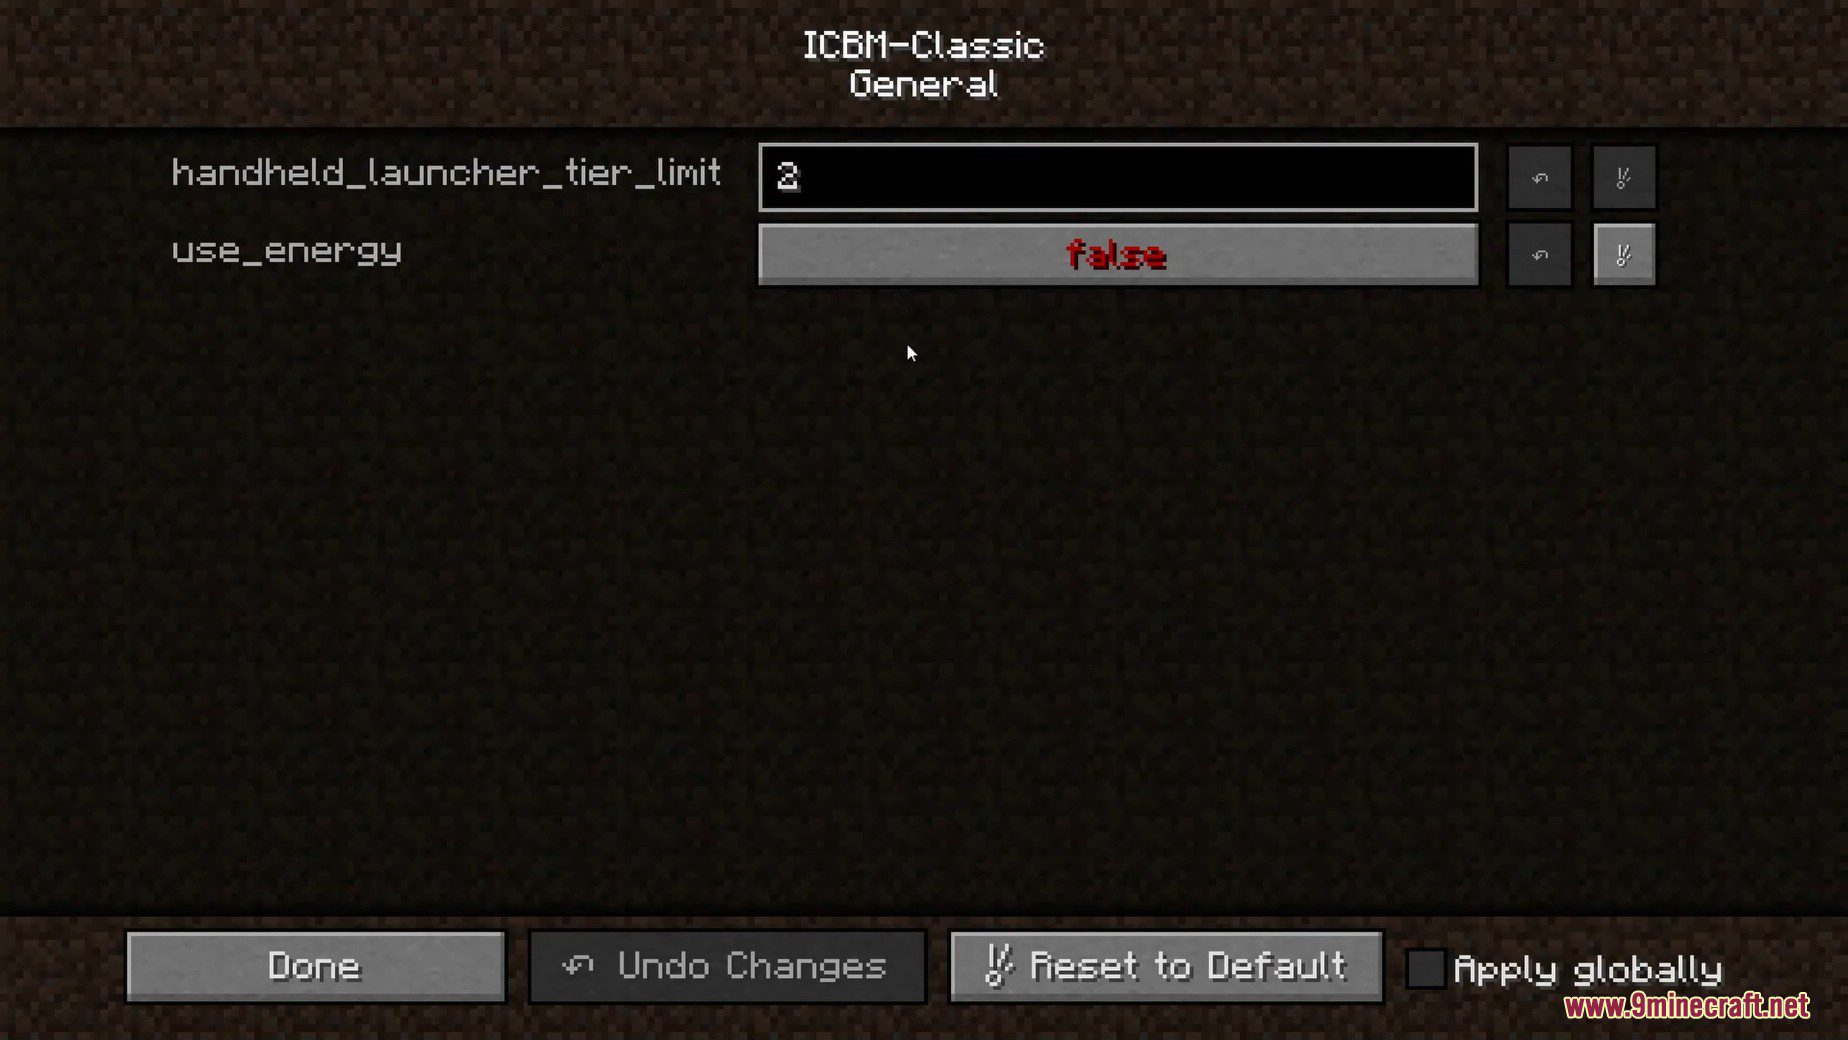 ICBM Classic Mod (1.12.2, 1.7.10) - Missiles, Nuclear Bomb, Explosives 4